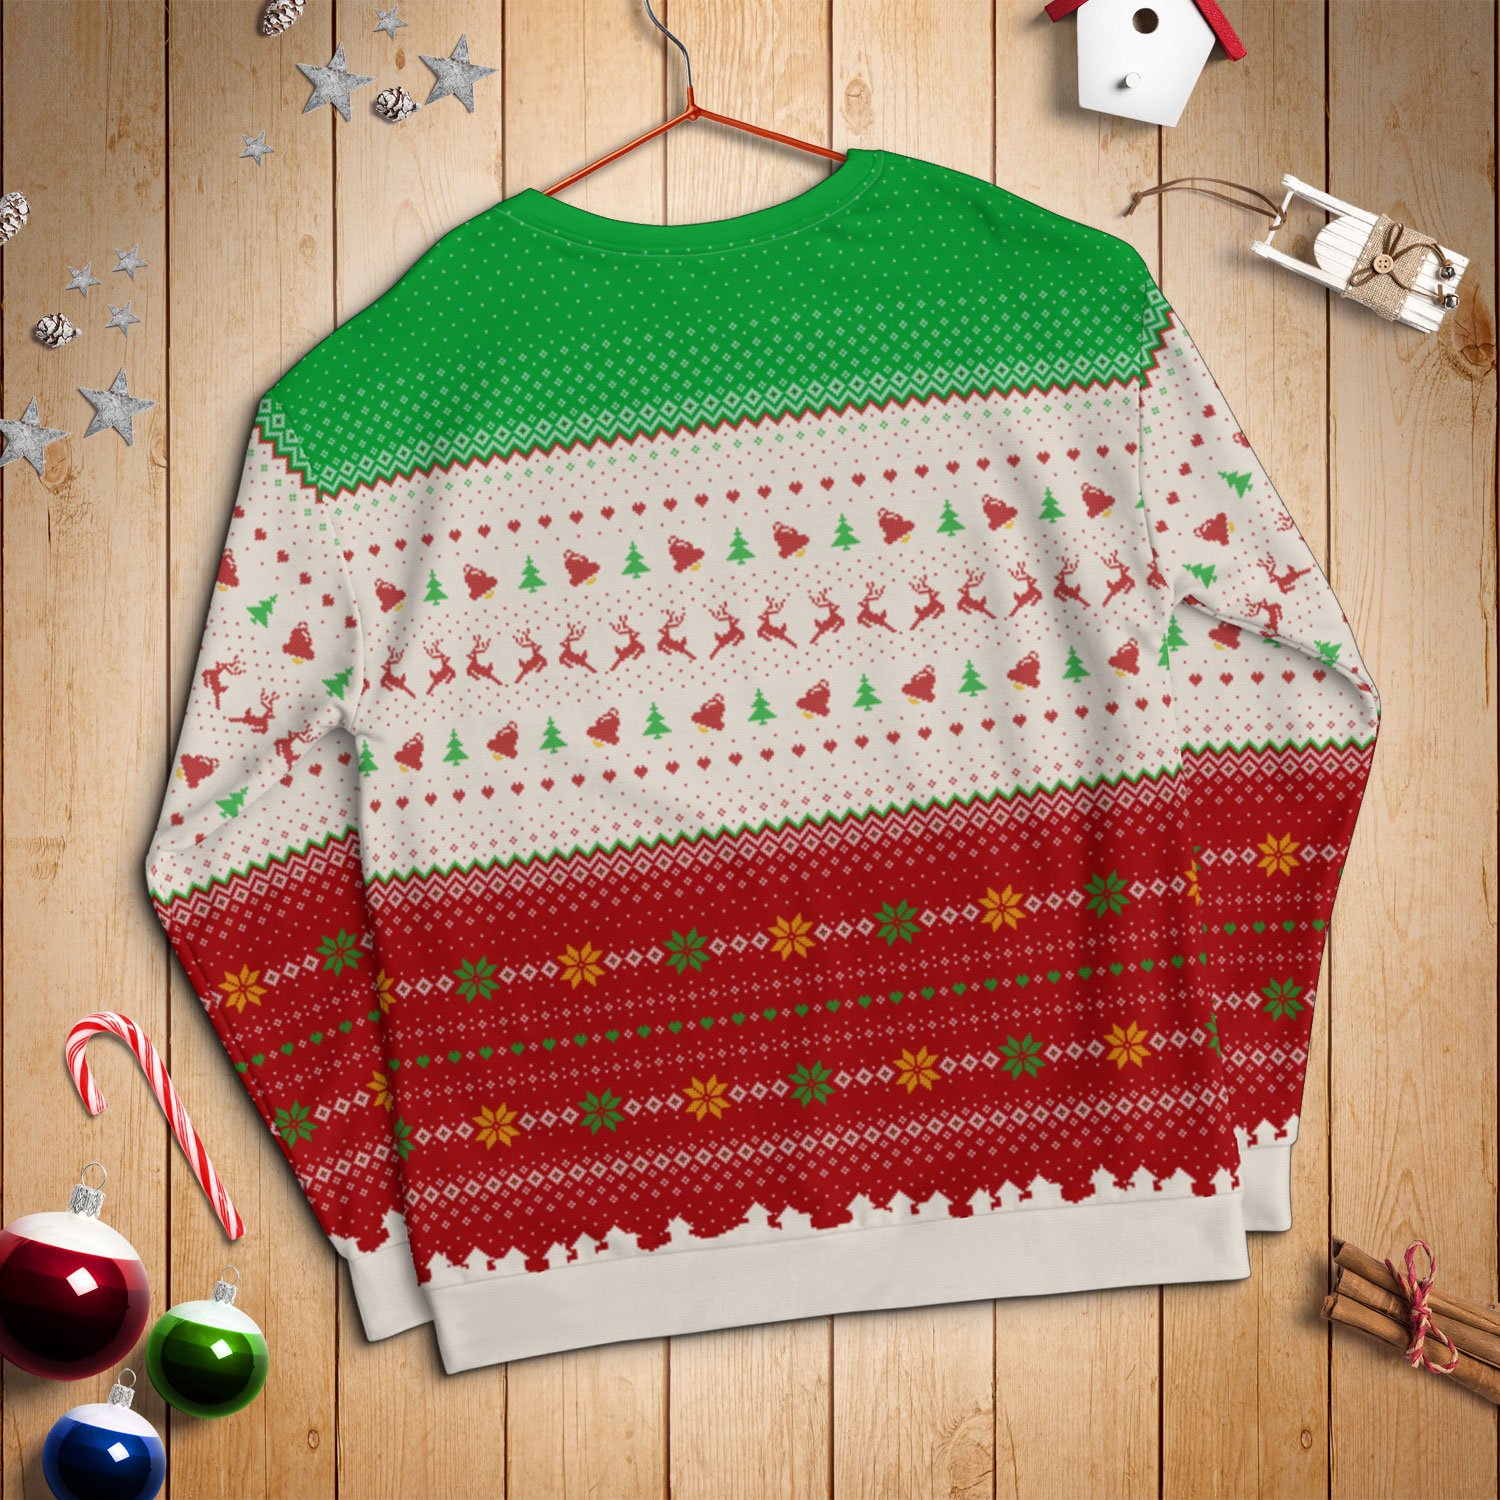 Bedford Falls Ugly Sweater inspired by It’s a Wonderful Life ...